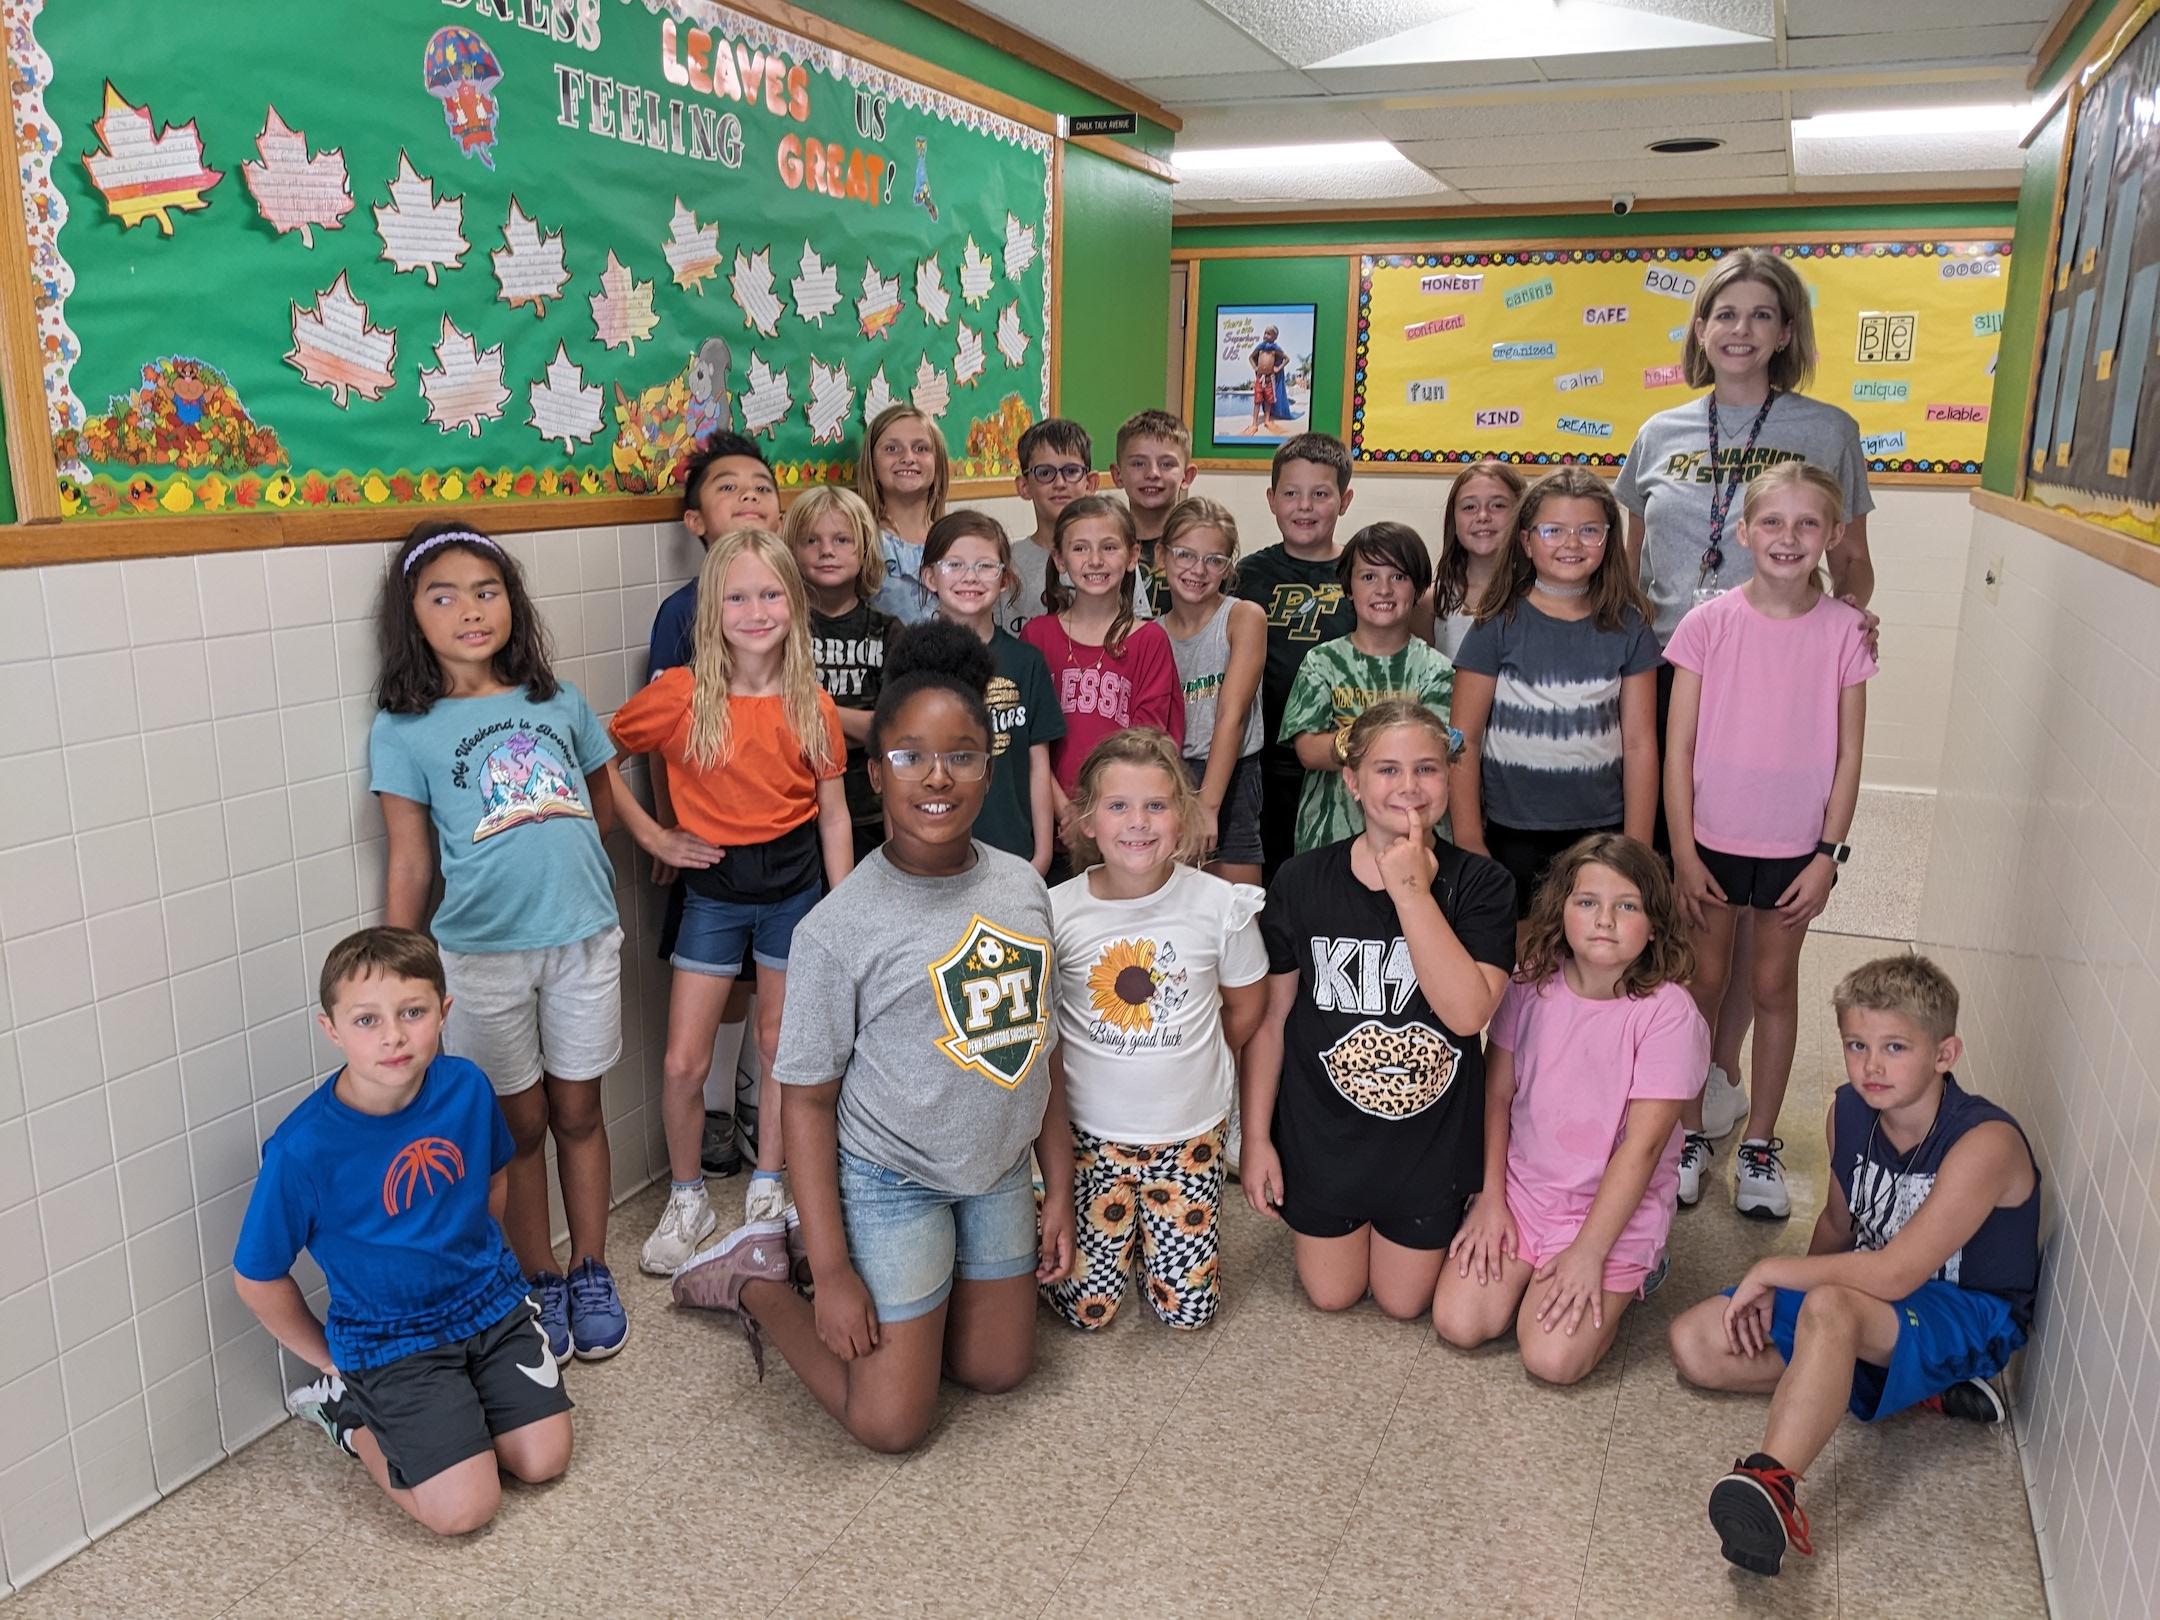 Mrs. Leydig and her third-grade class